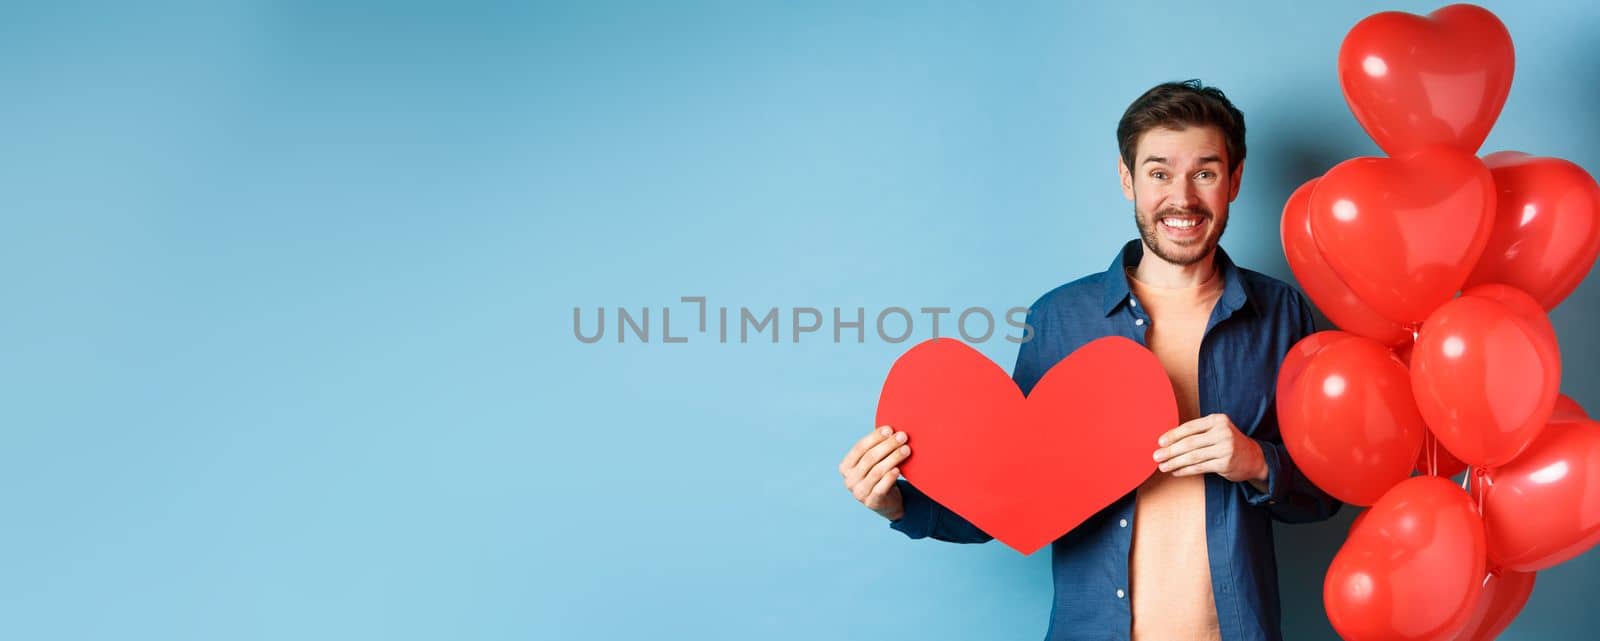 Valentines day concept. Smiling man say I love you, holding paper red heart cutout, standing near romantic balloons, blue background.